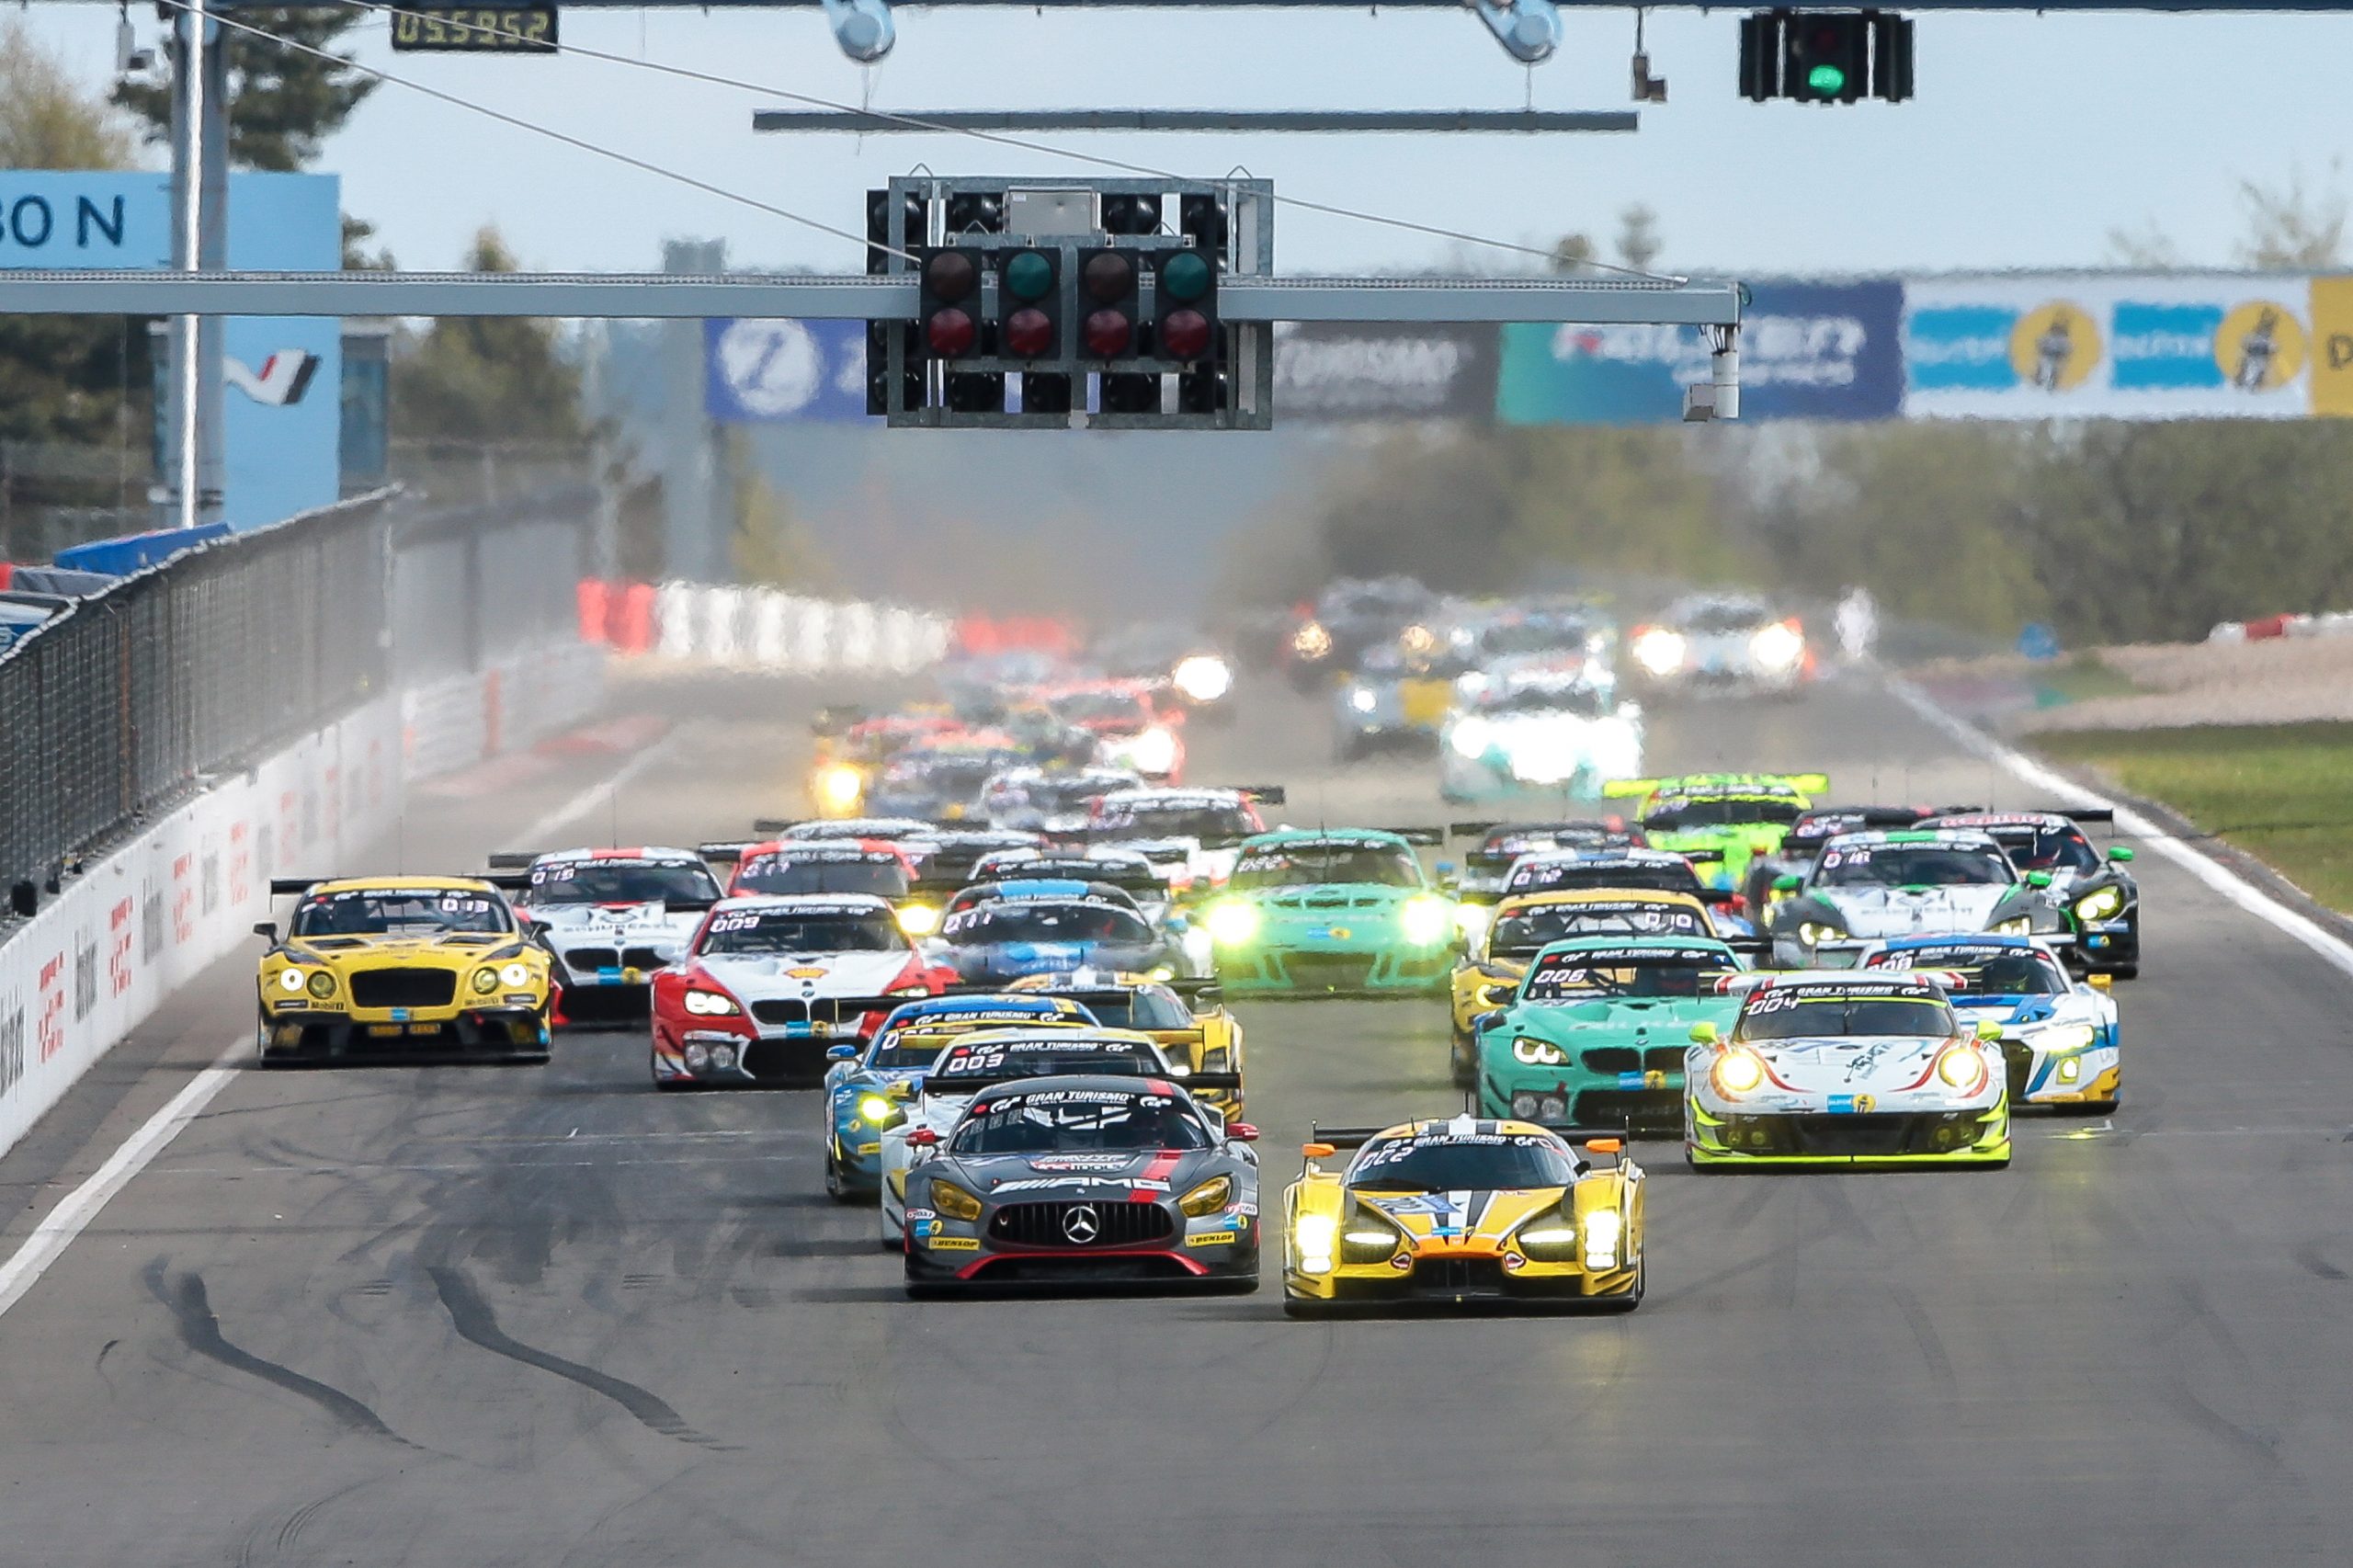 Top-class grid for the race of the year